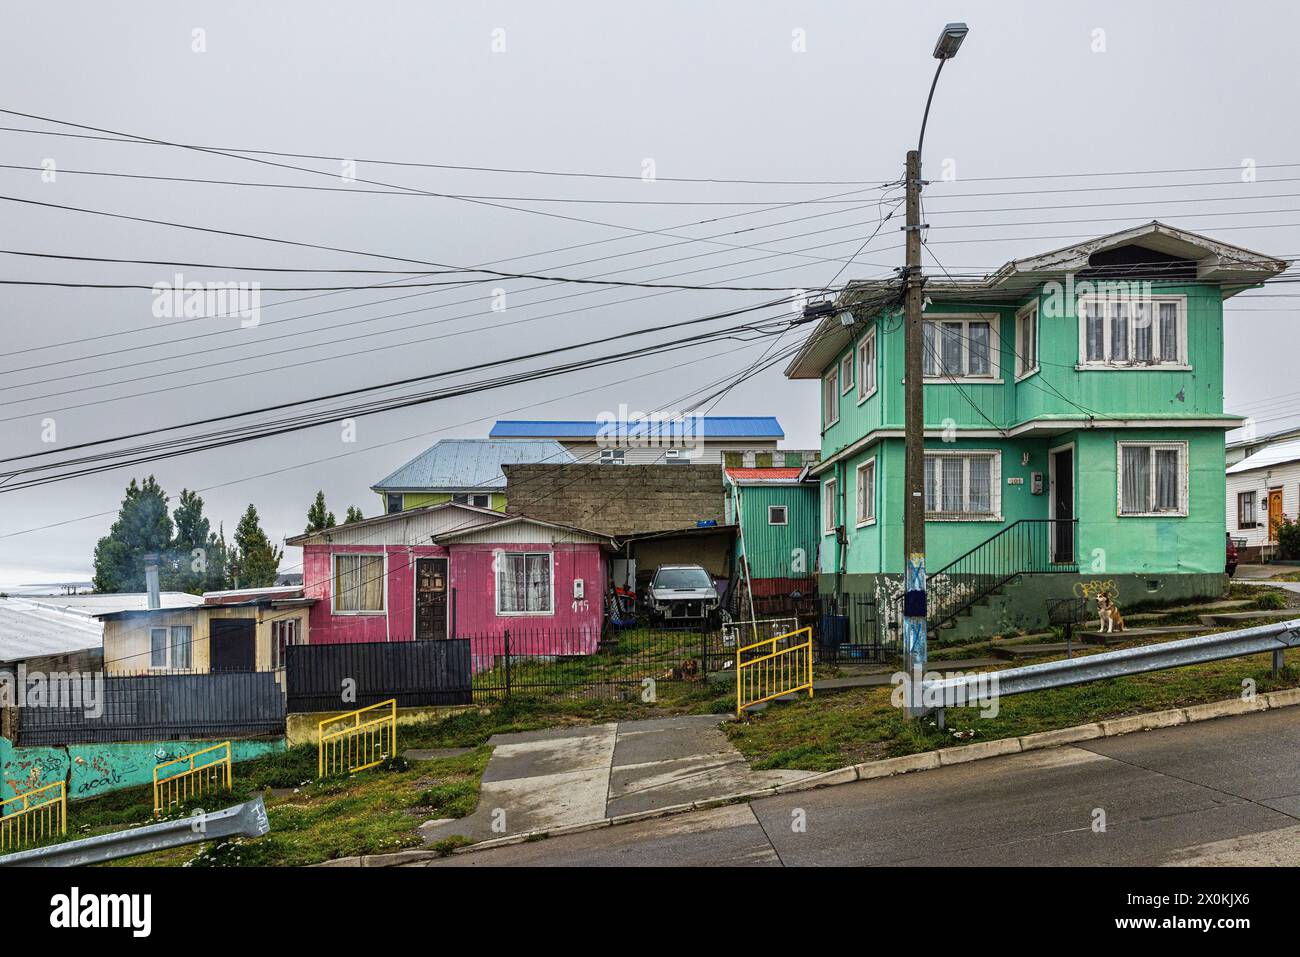 Colorful houses and street. Punta Arenas, Patagonia y la Antarctica Chilena, Chile. Stock Photo